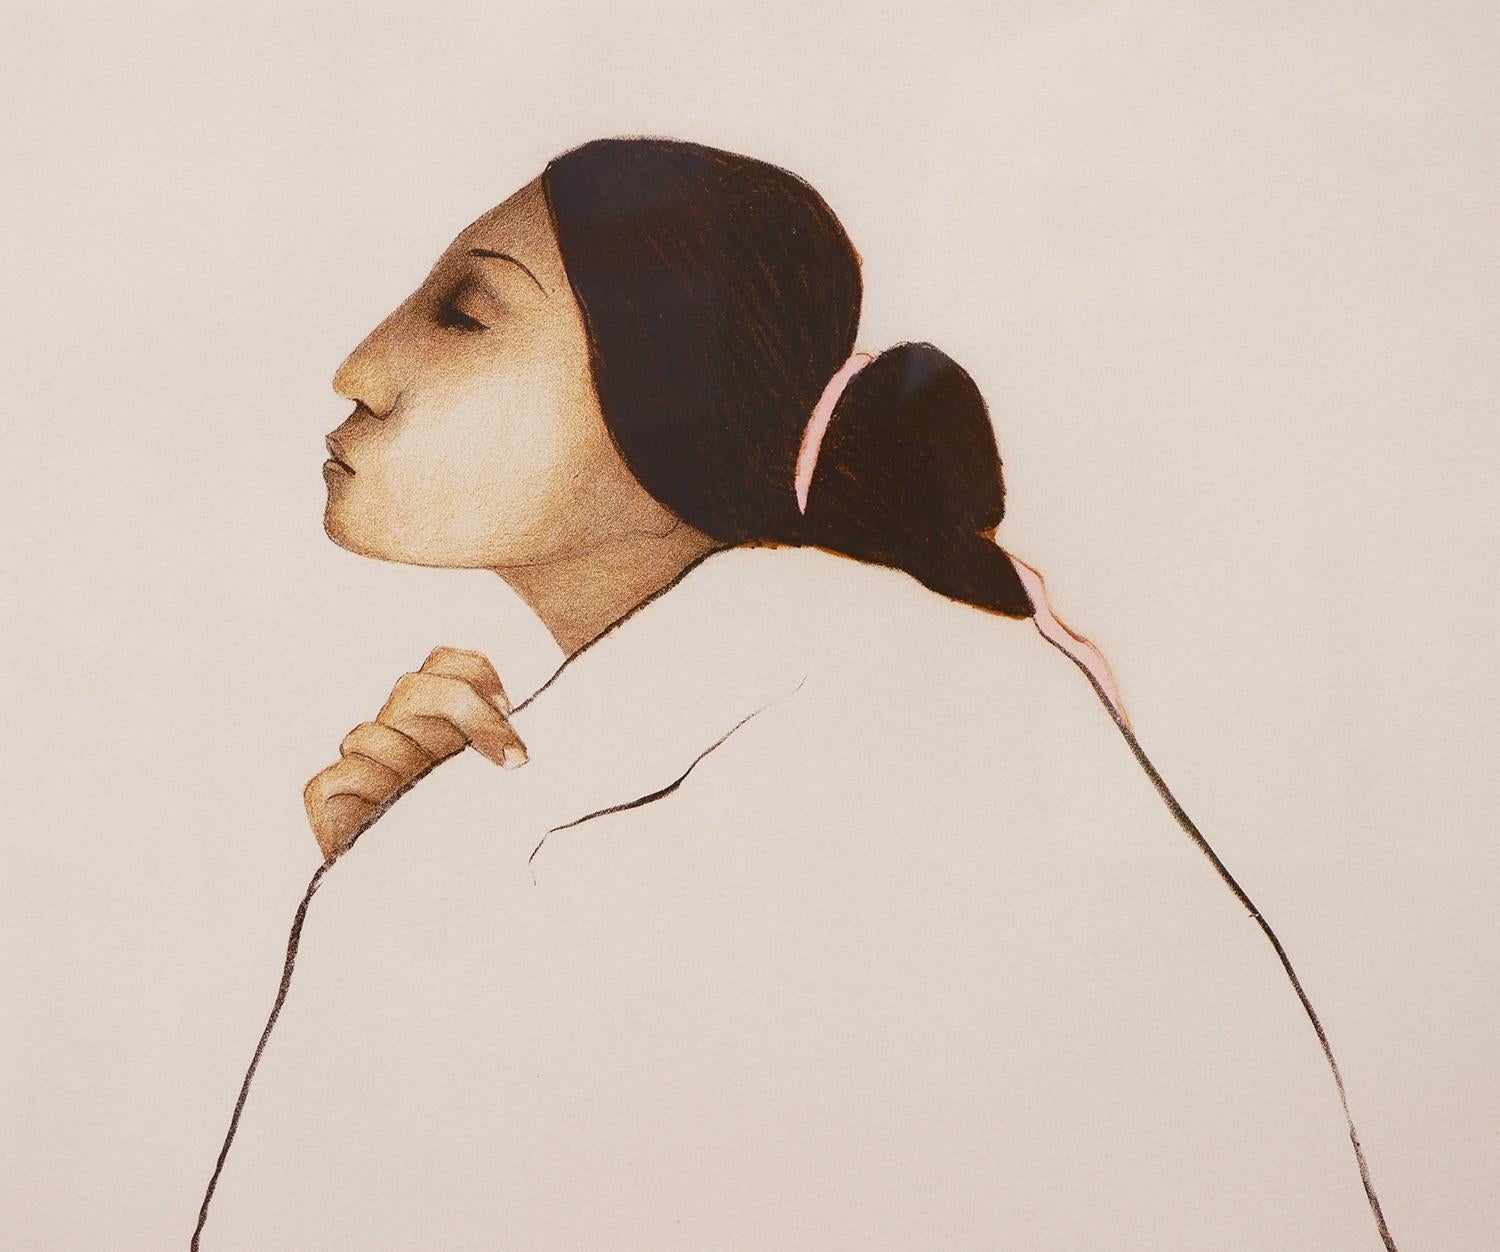 Modern figurative abstract lithograph by Sante Fe, NM artist R.C. Gorman (Rudolph Carl Gorman). This lithograph depicts a Taos woman in a kneeling position and wearing a plain fringed shawl. Signed, dated, and editioned by the artist along lower